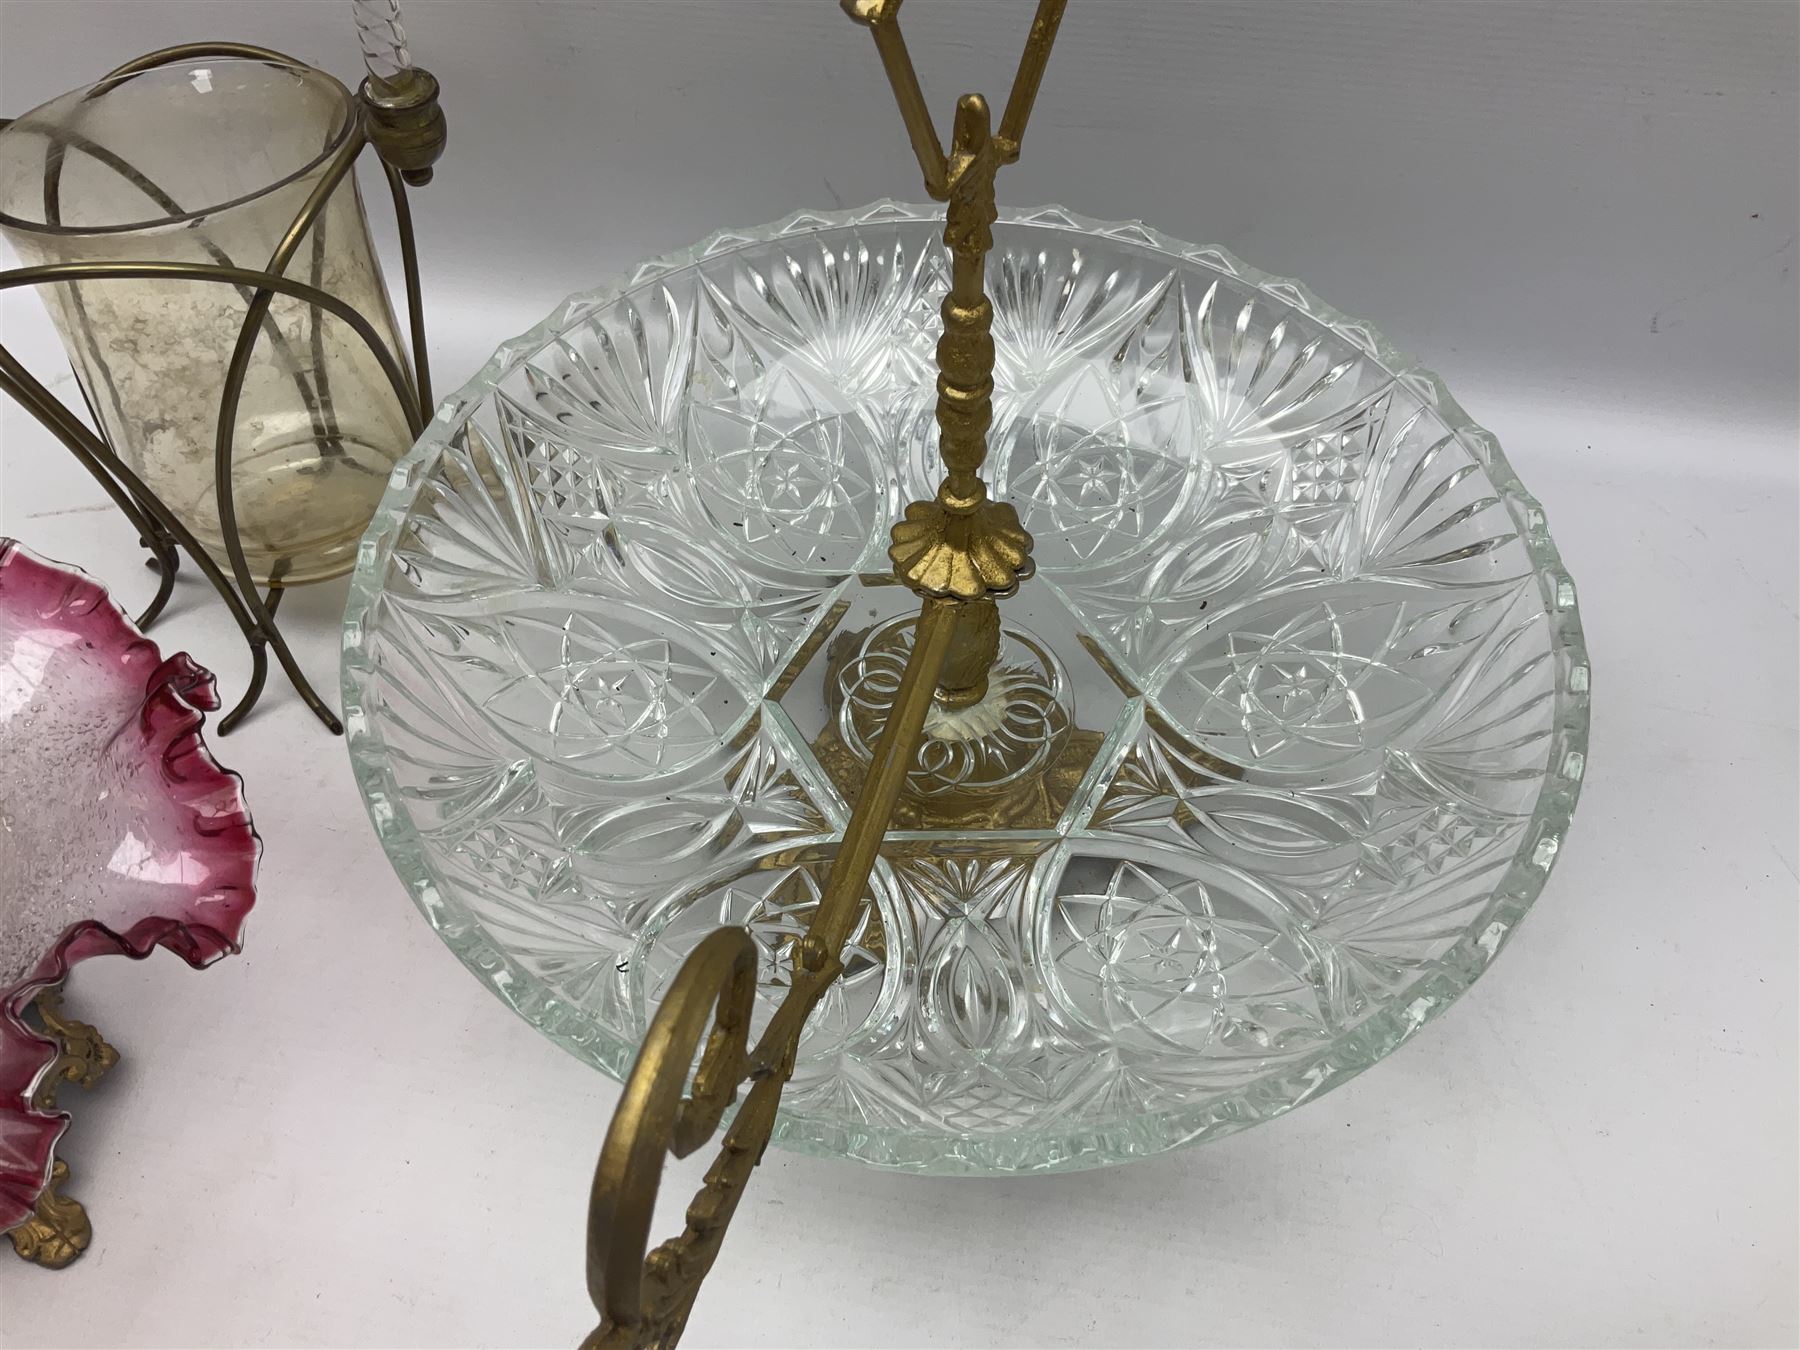 20th century moulded glass and gilt centre piece bowl with carrying handle and ornate trefoil base - Image 3 of 8